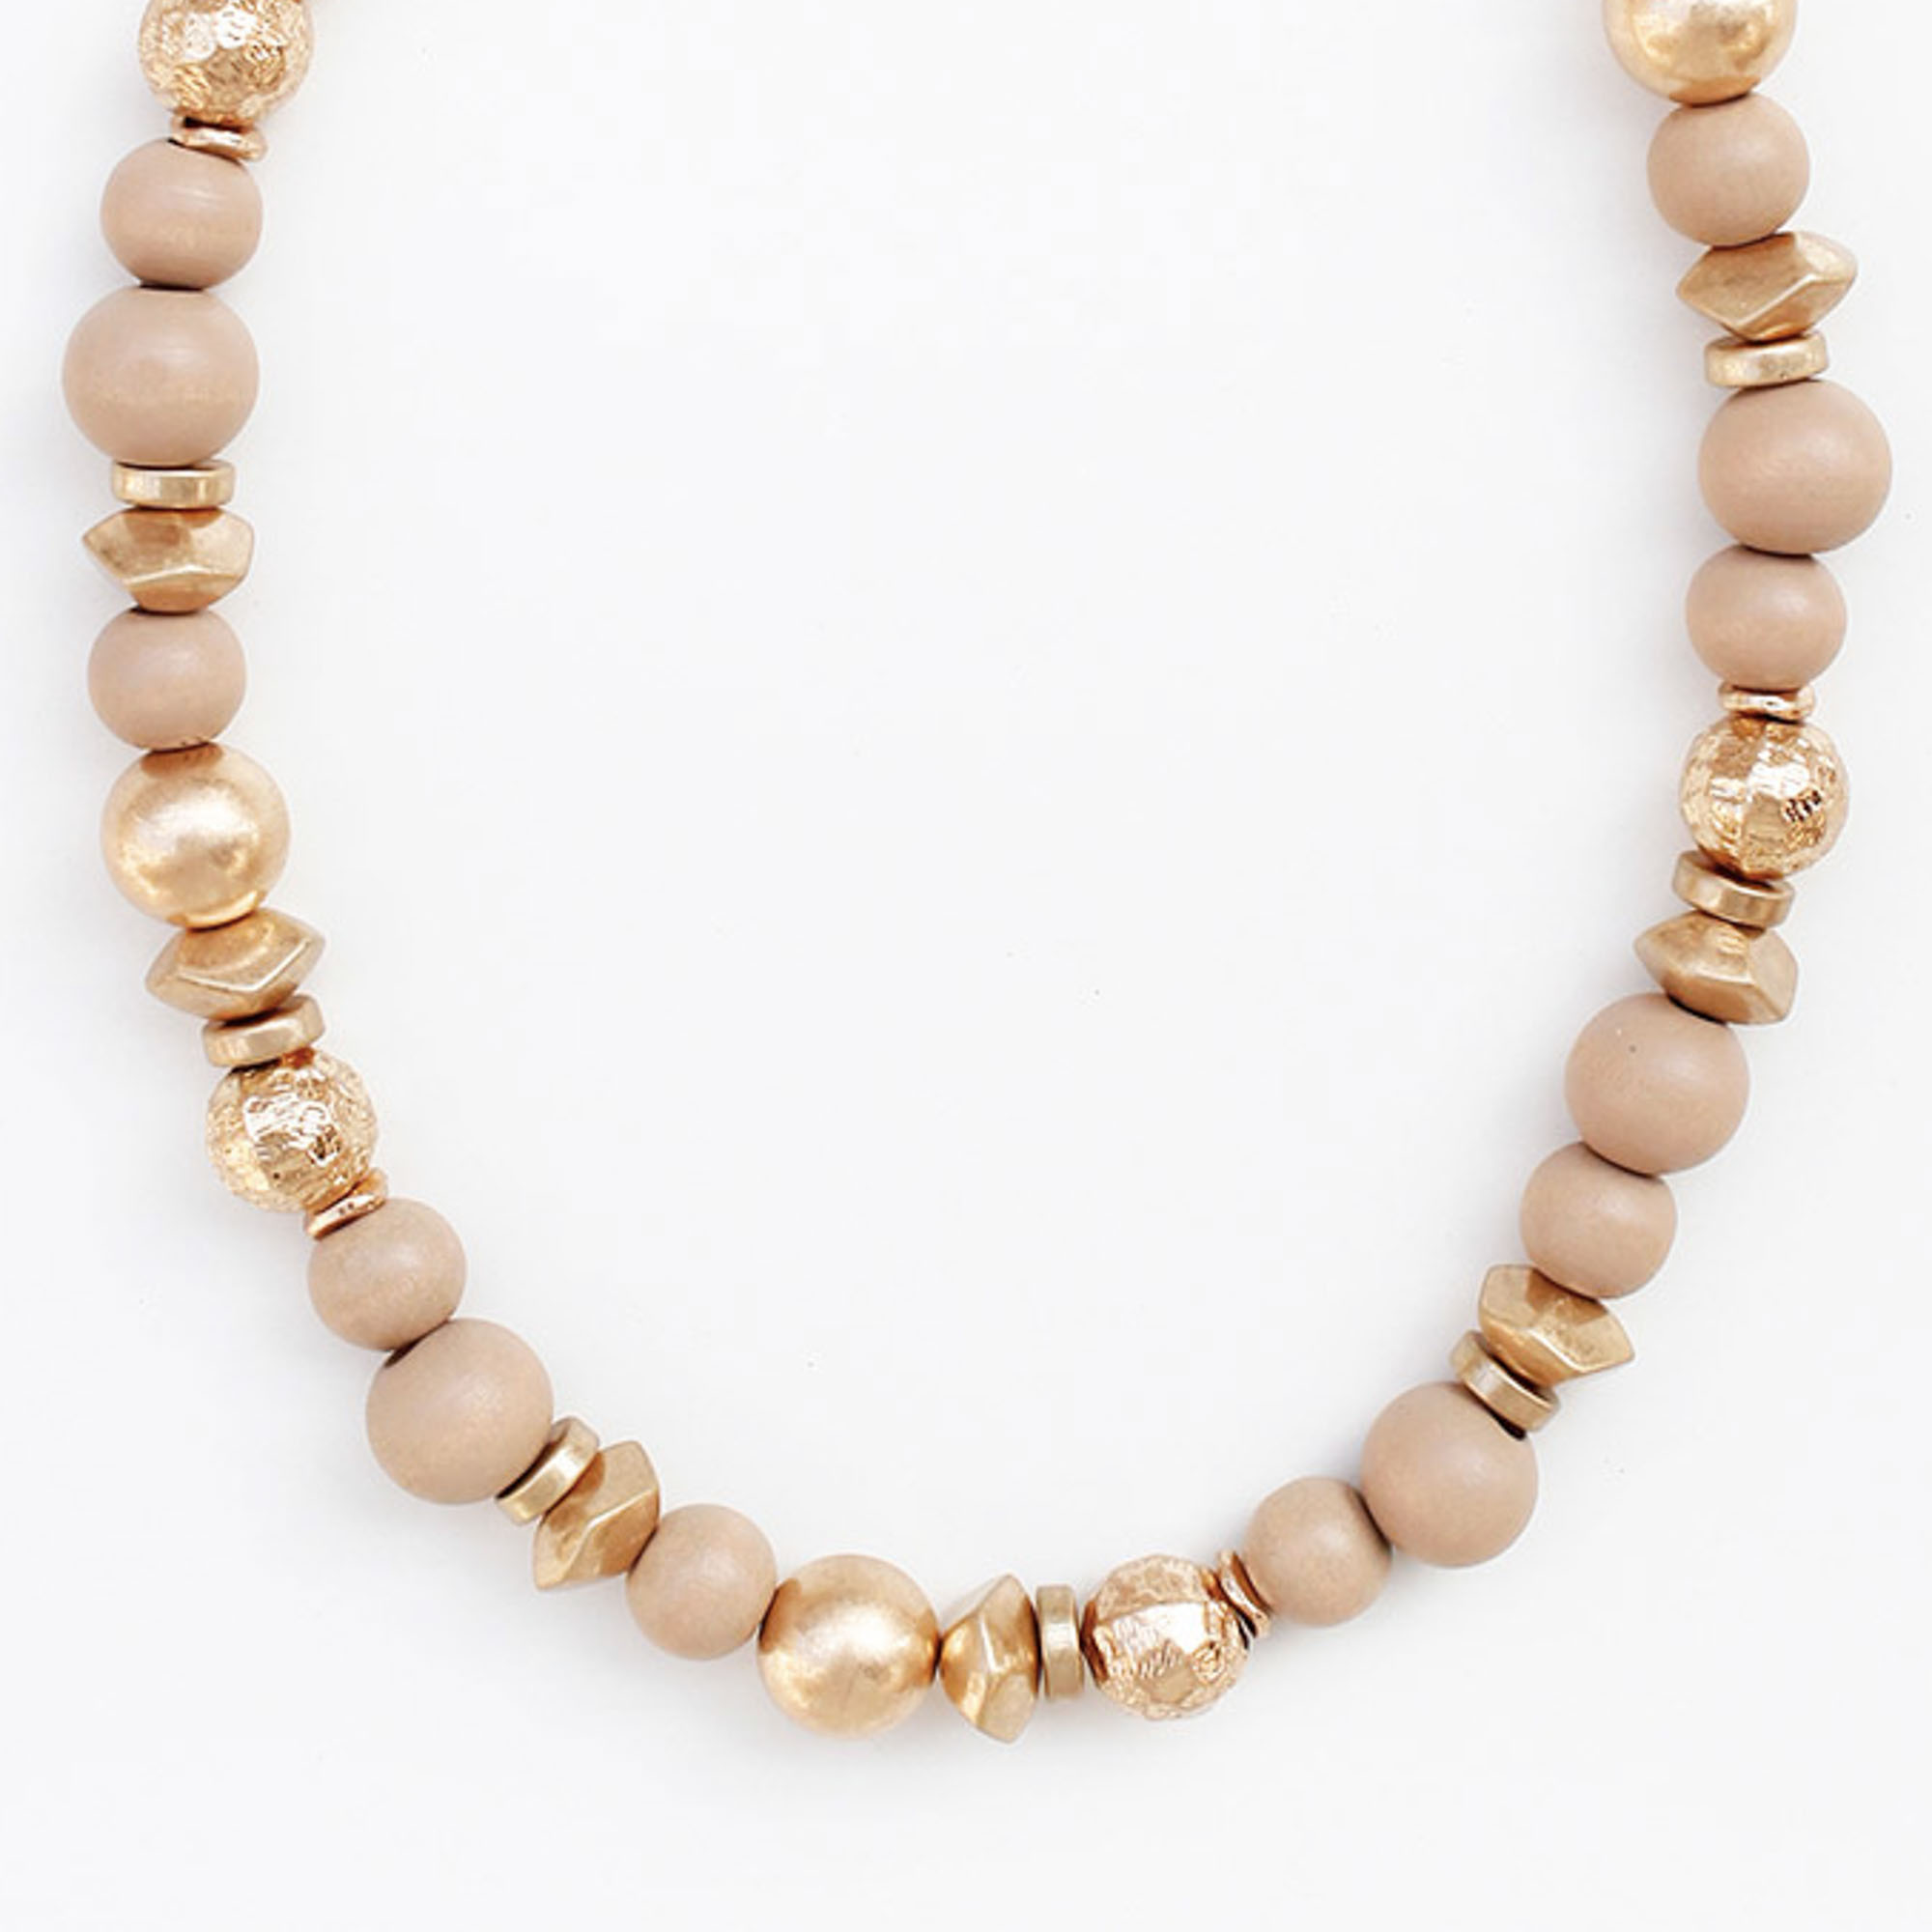 WOOD BALL BEAD NECKLACE